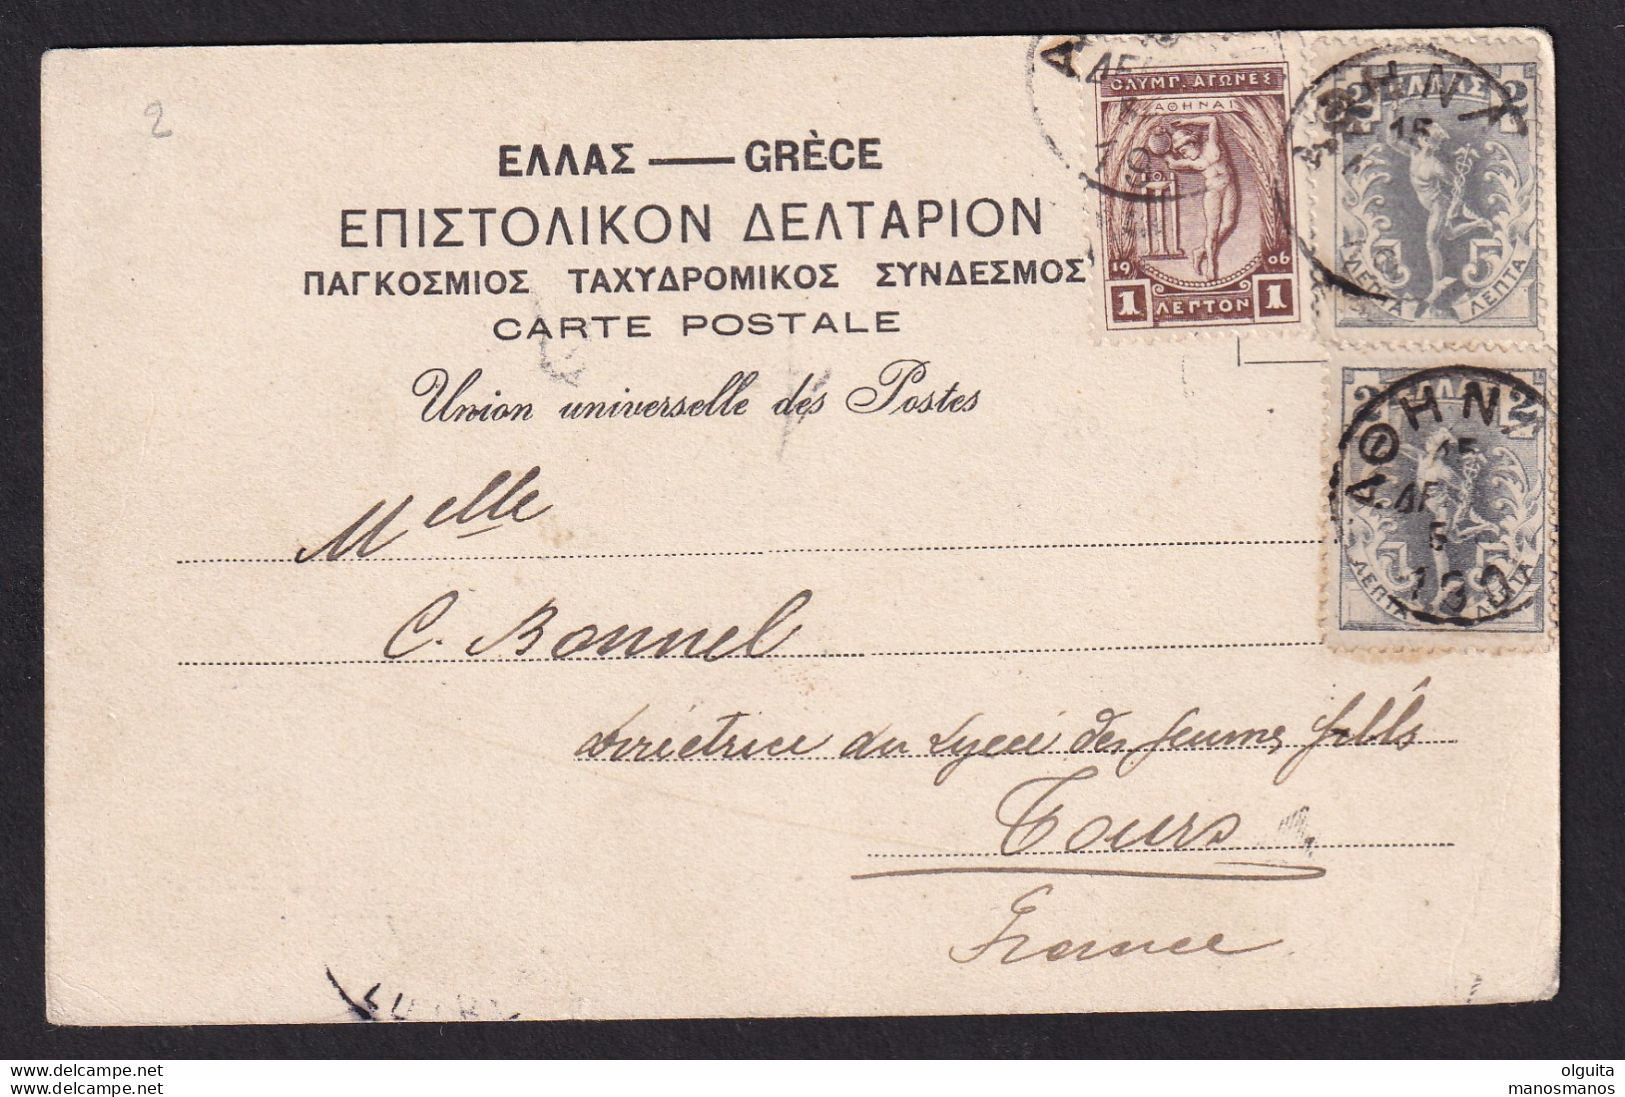 DDCC 396 - GREECE Olympic Games 1906 - Viewcard With Mixed Franking Olympic Stamp With Iptamenos ATHINAI - Covers & Documents